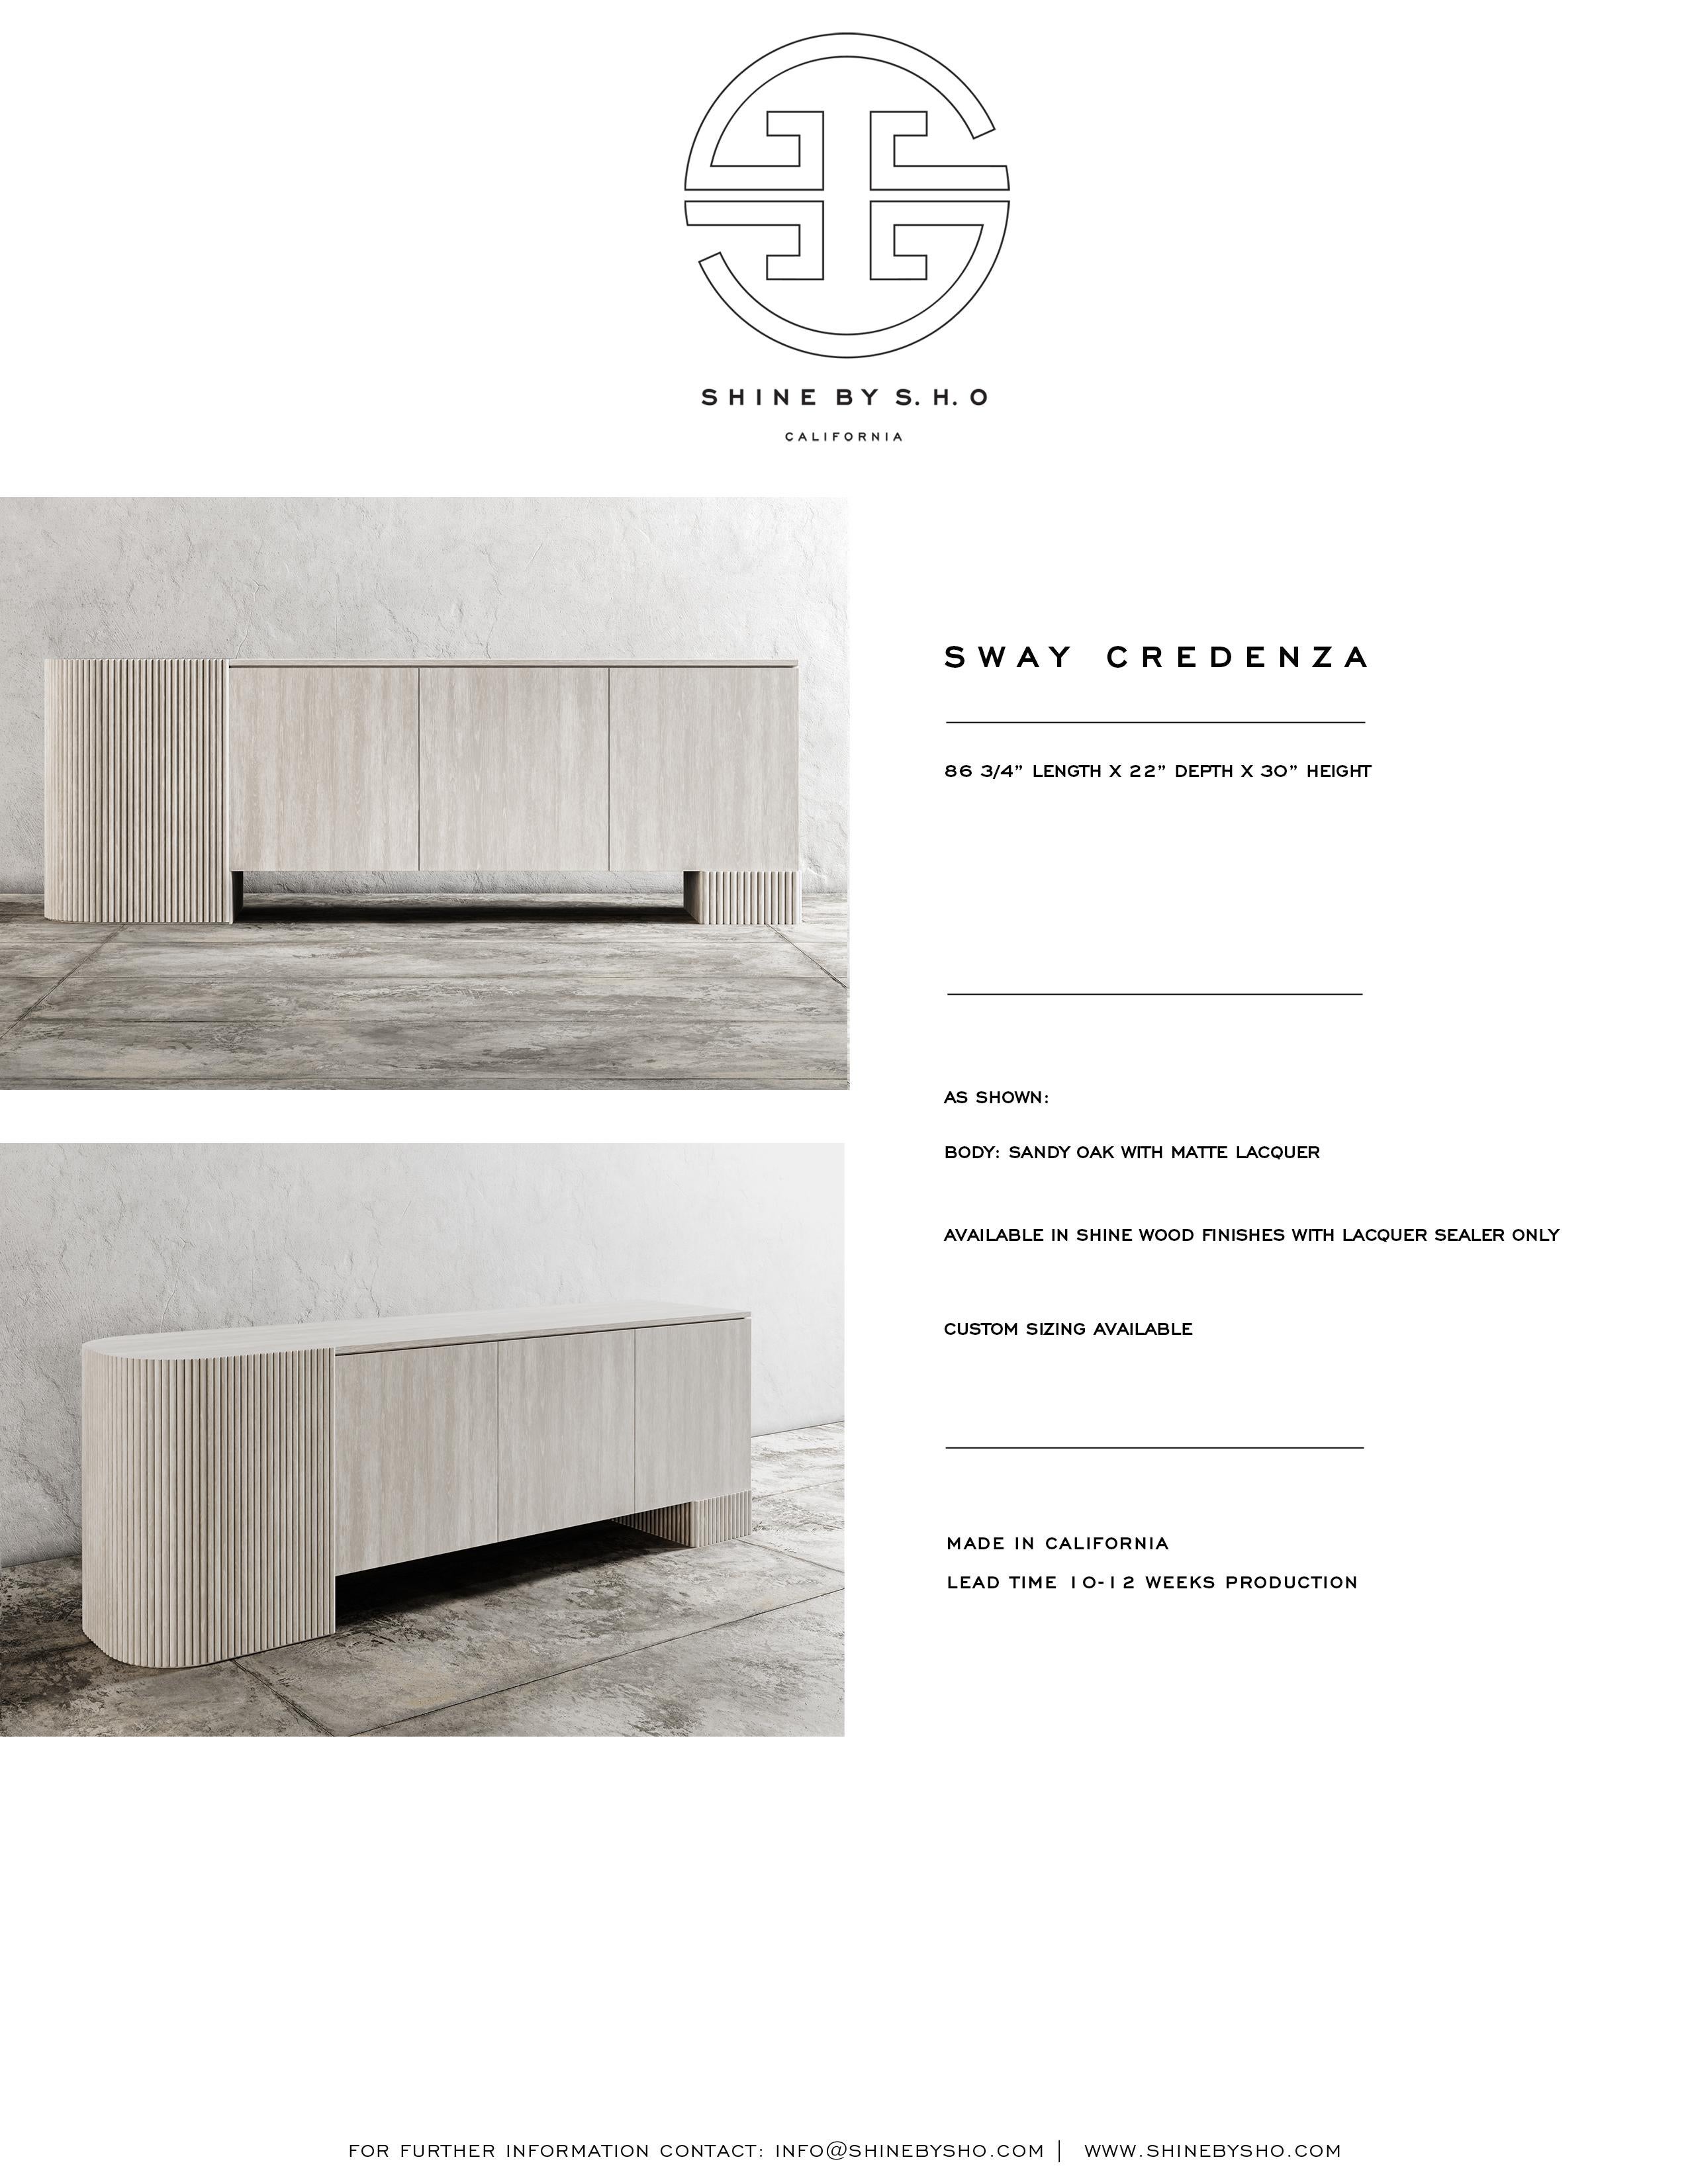 Marble SWAY CREDENZA - Modern Design with Sandy Oak + Matte Lacquer For Sale